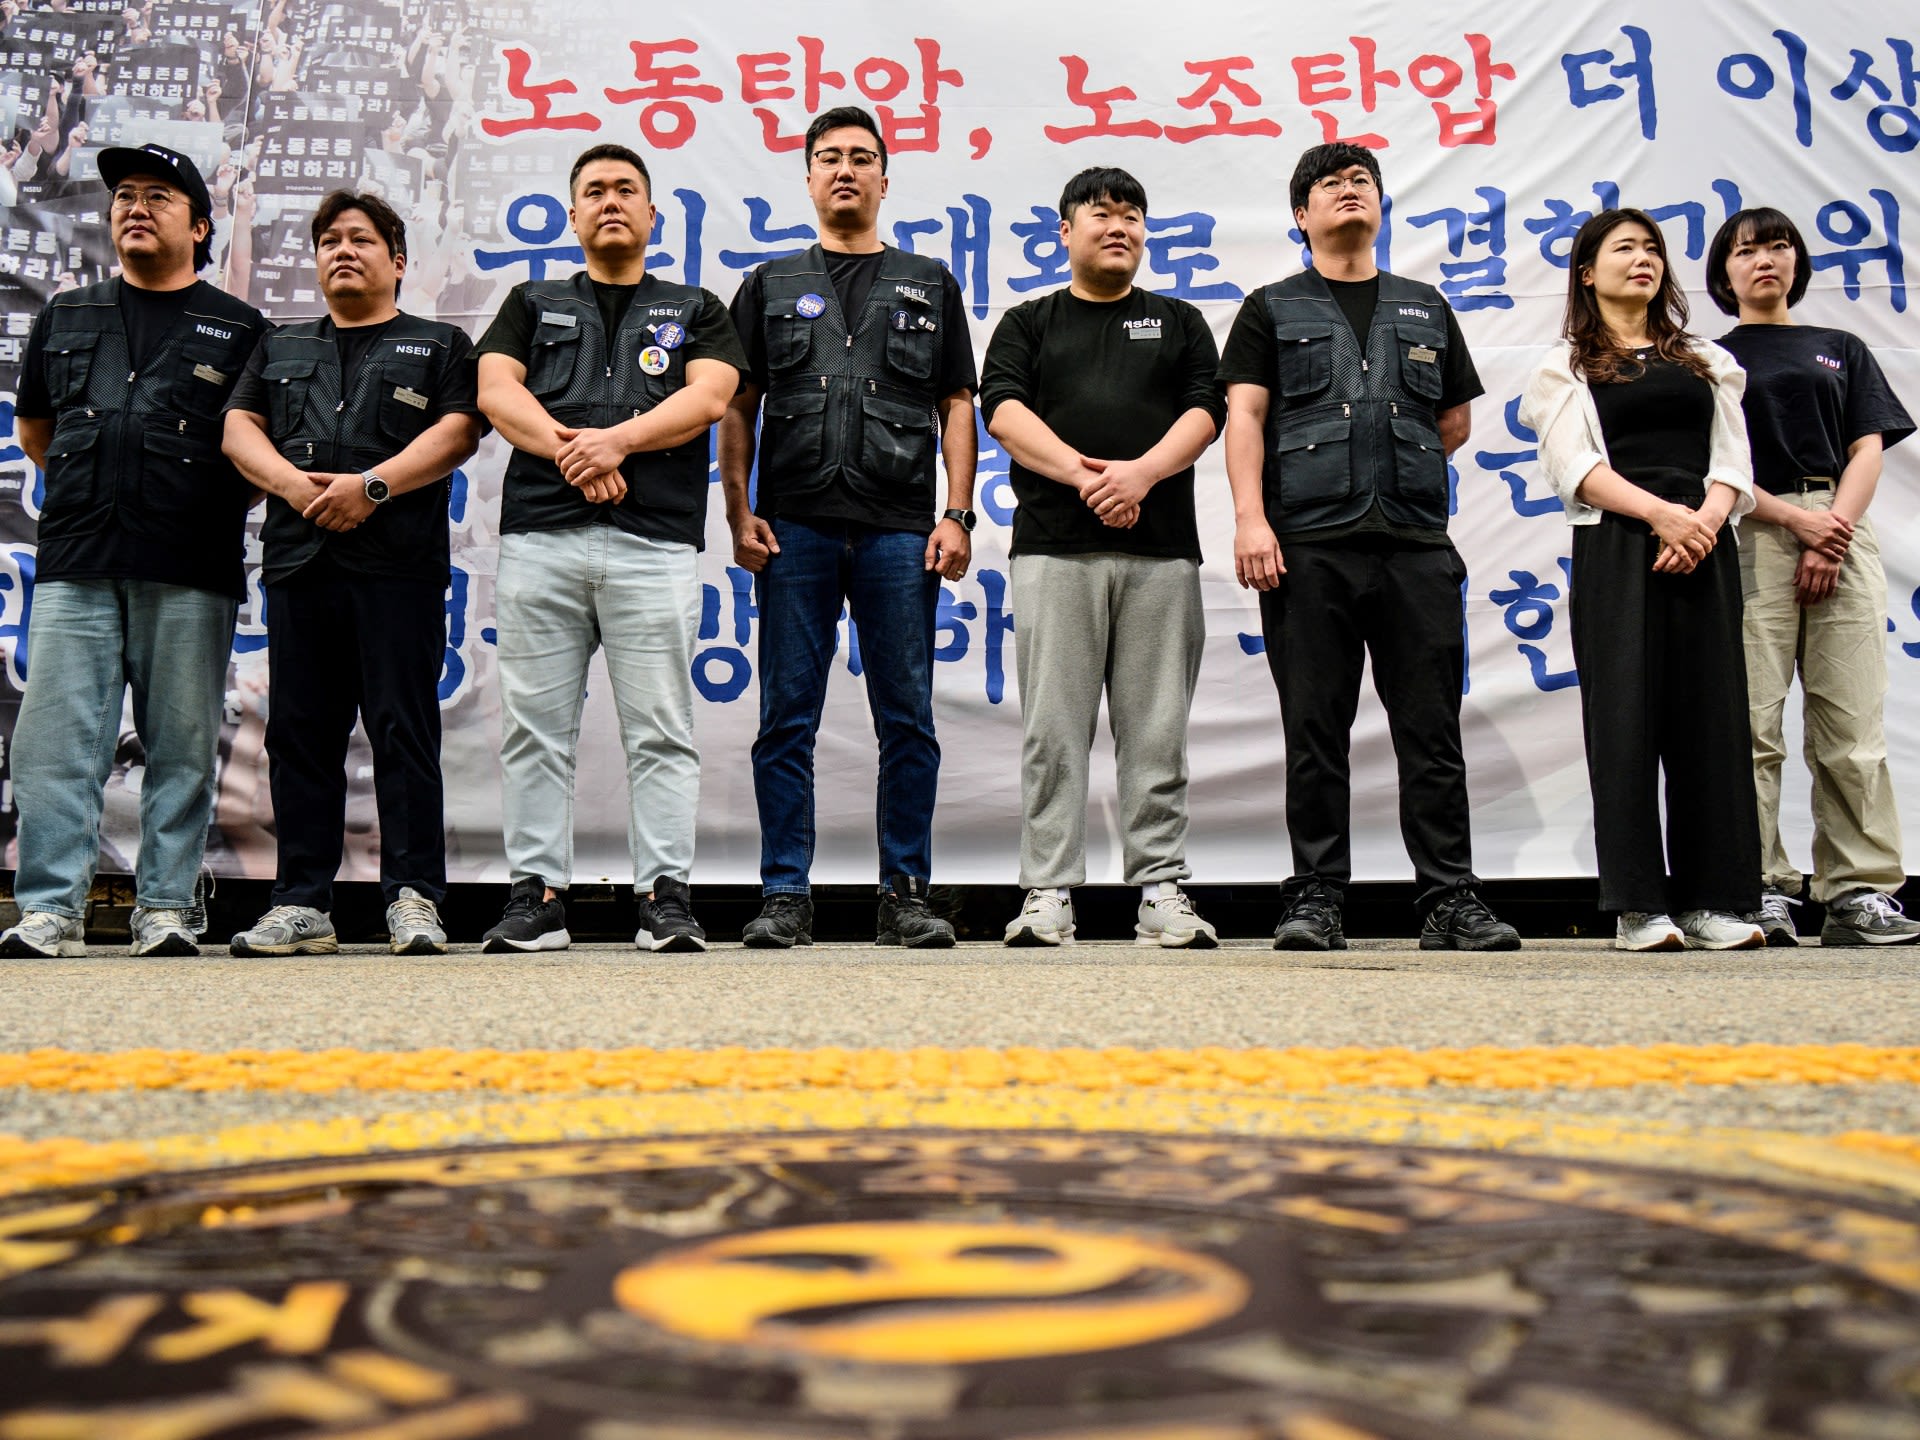 Samsung workers in South Korea take industrial action for first time